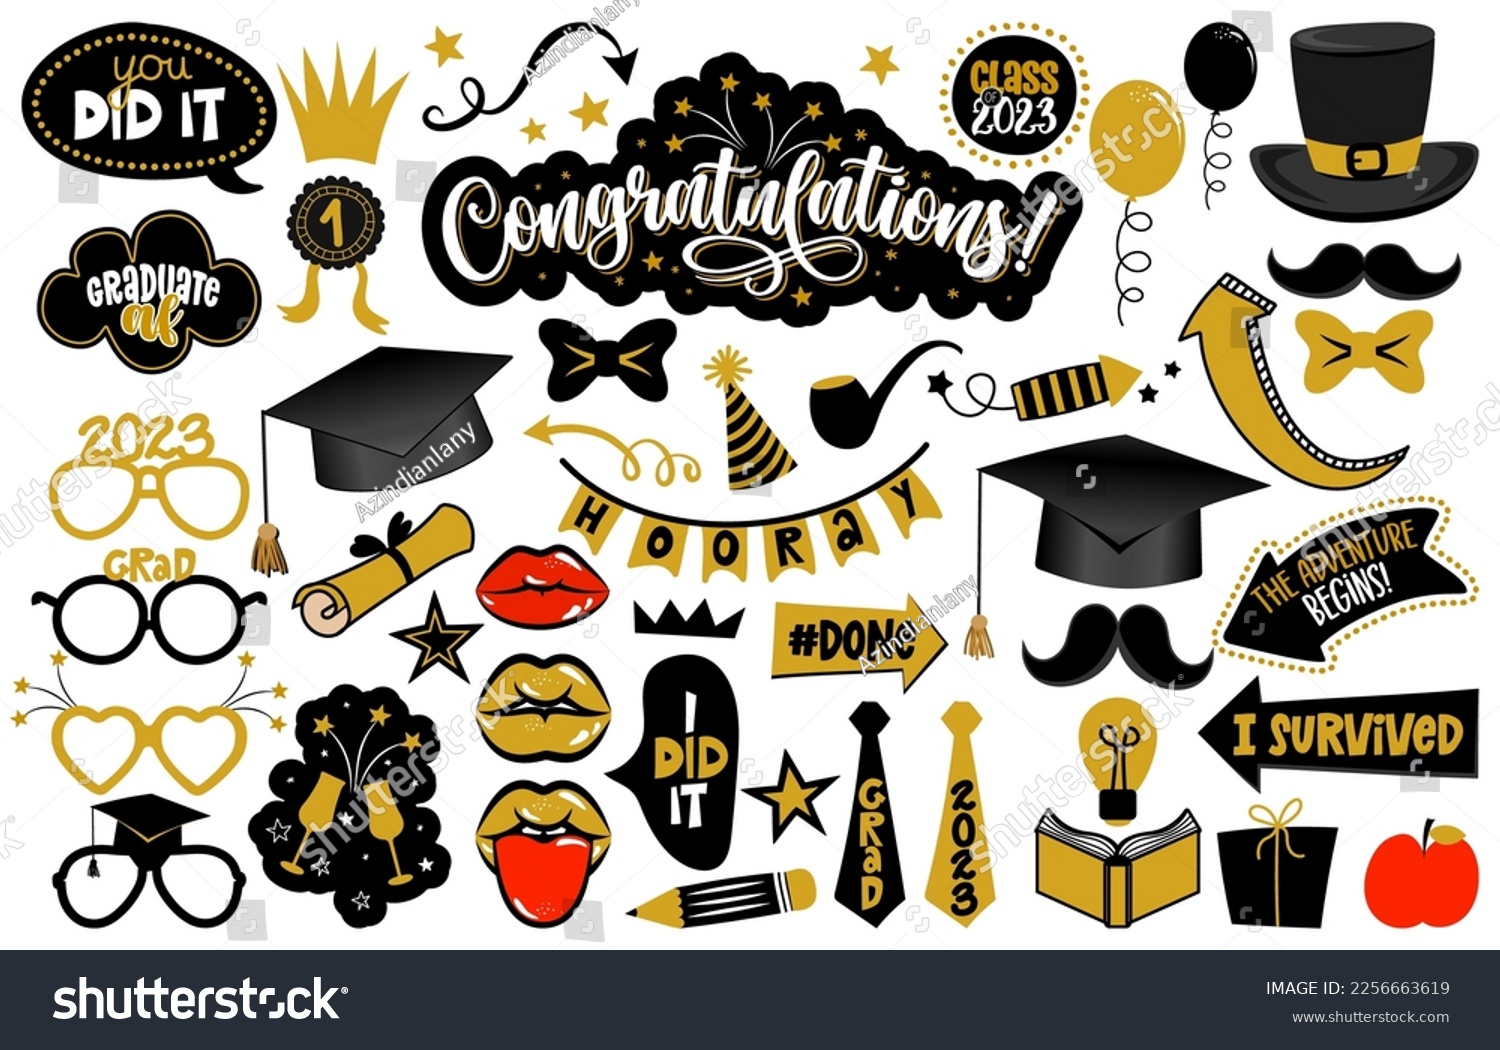 SVG of Congratulations Graduates photo booth prop set. Premium vector cap, hat, lips, eyeglasses, degree and many other. Graduation party photo booth. Let the adventure begin. svg